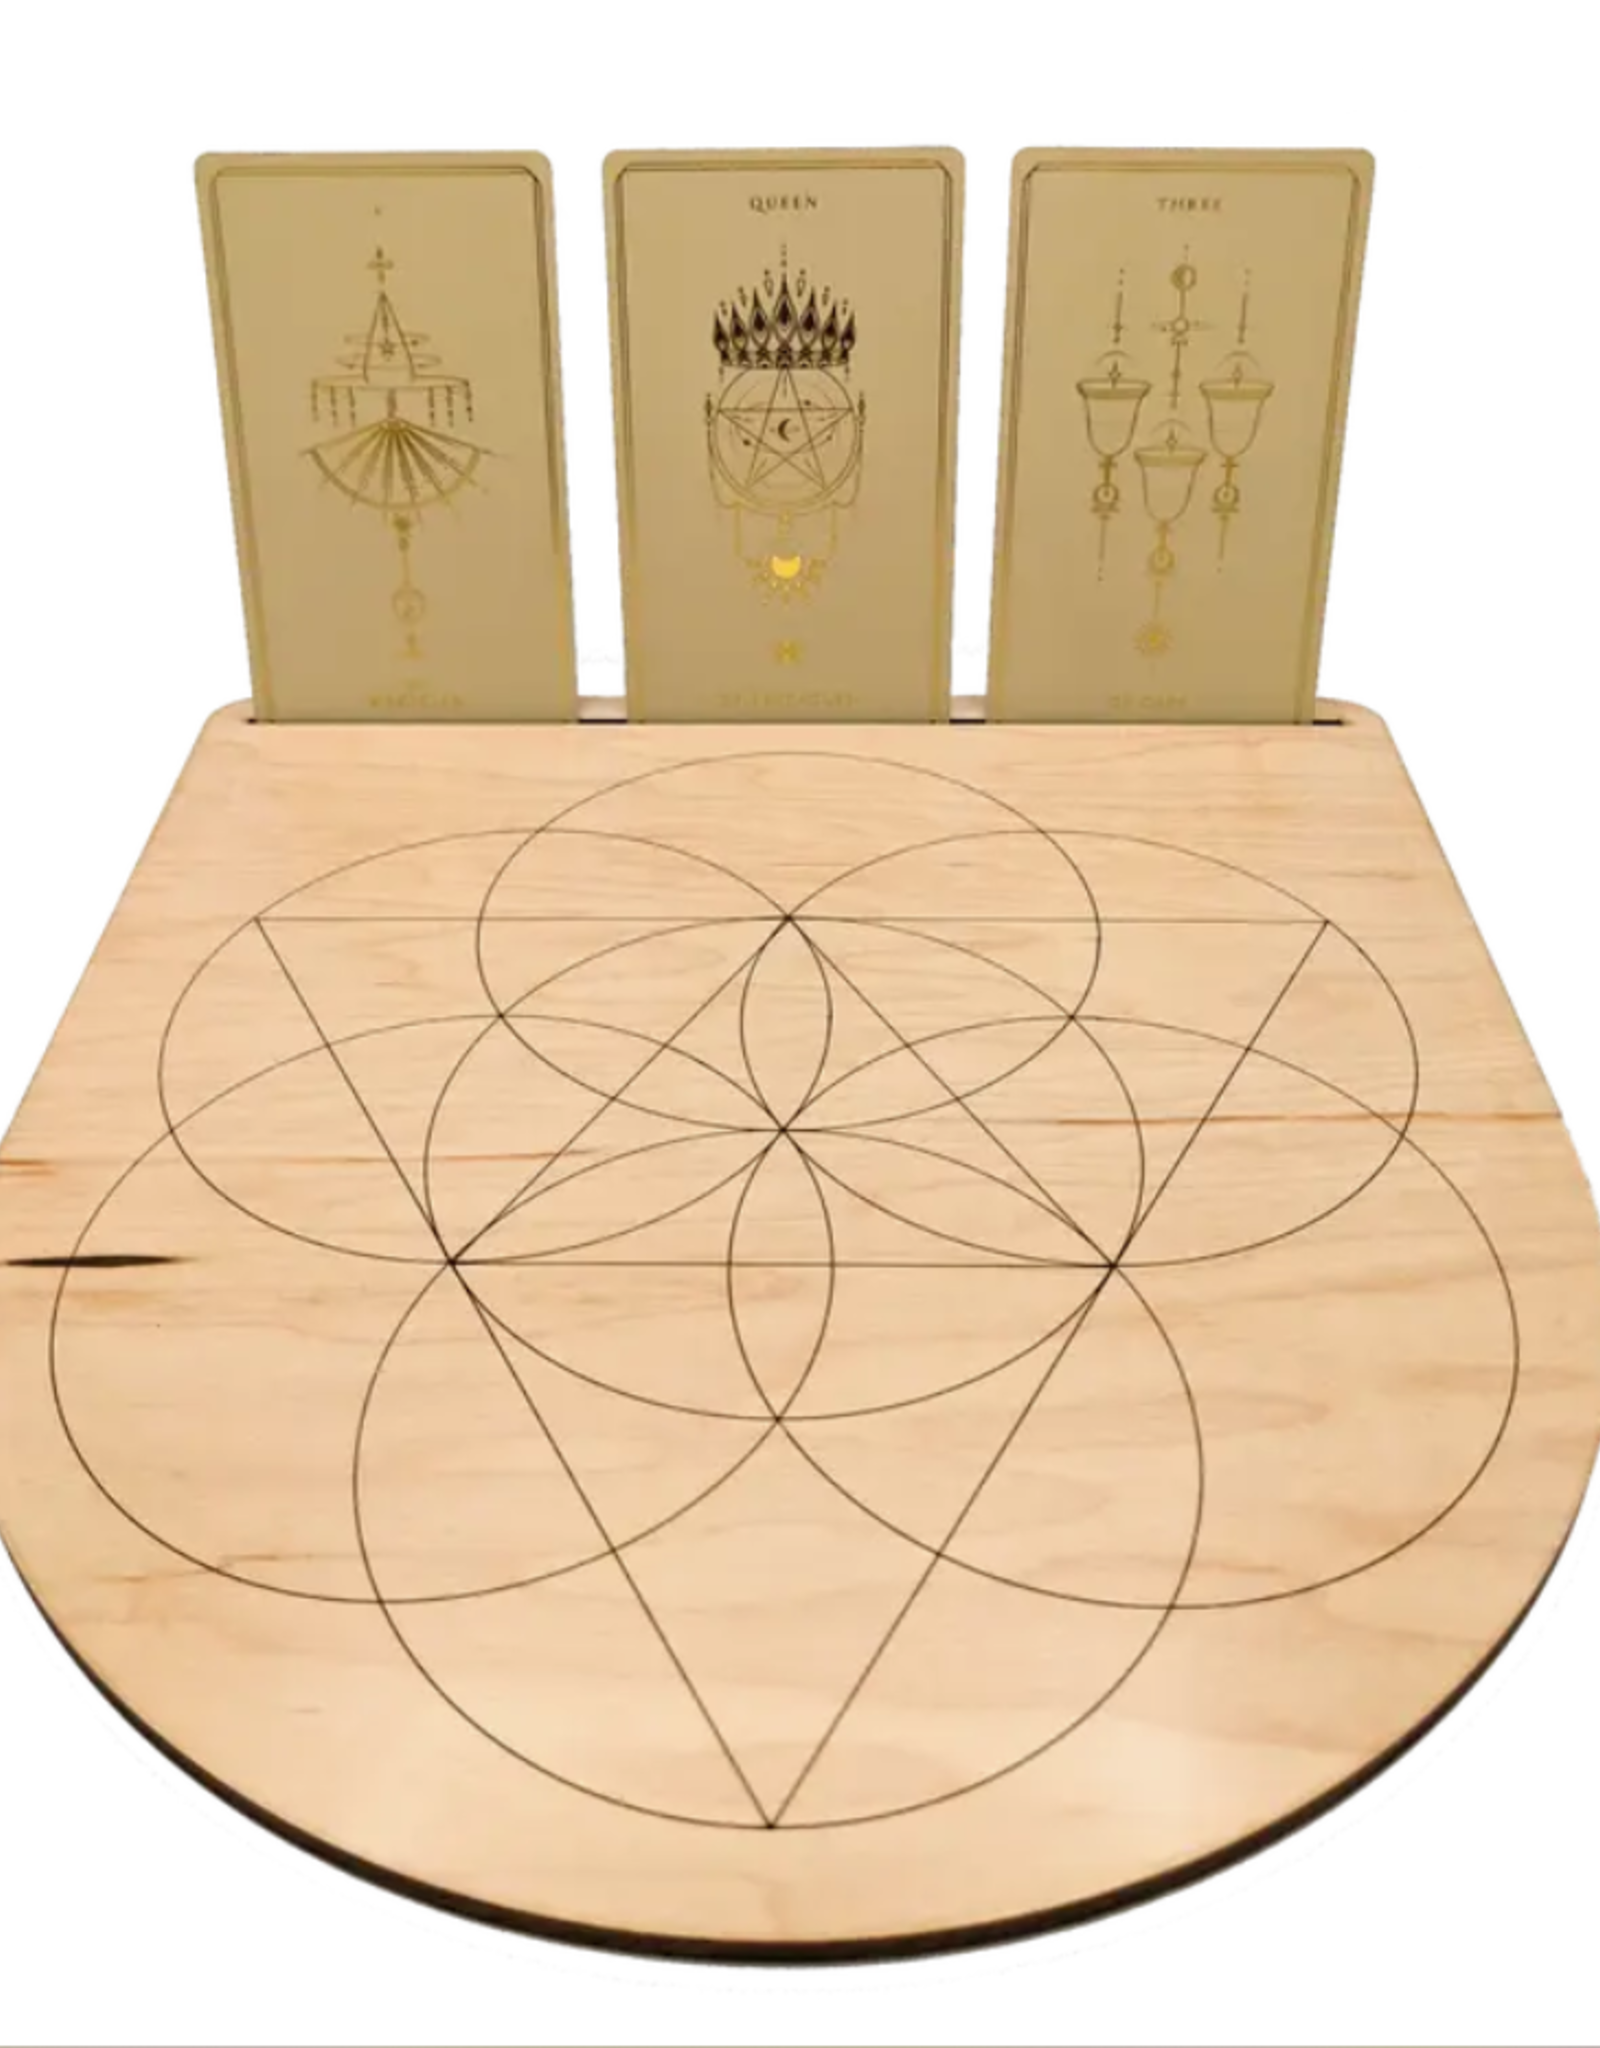 Ritual Pursuits Seed of Life Crystal Grid + Card Stand